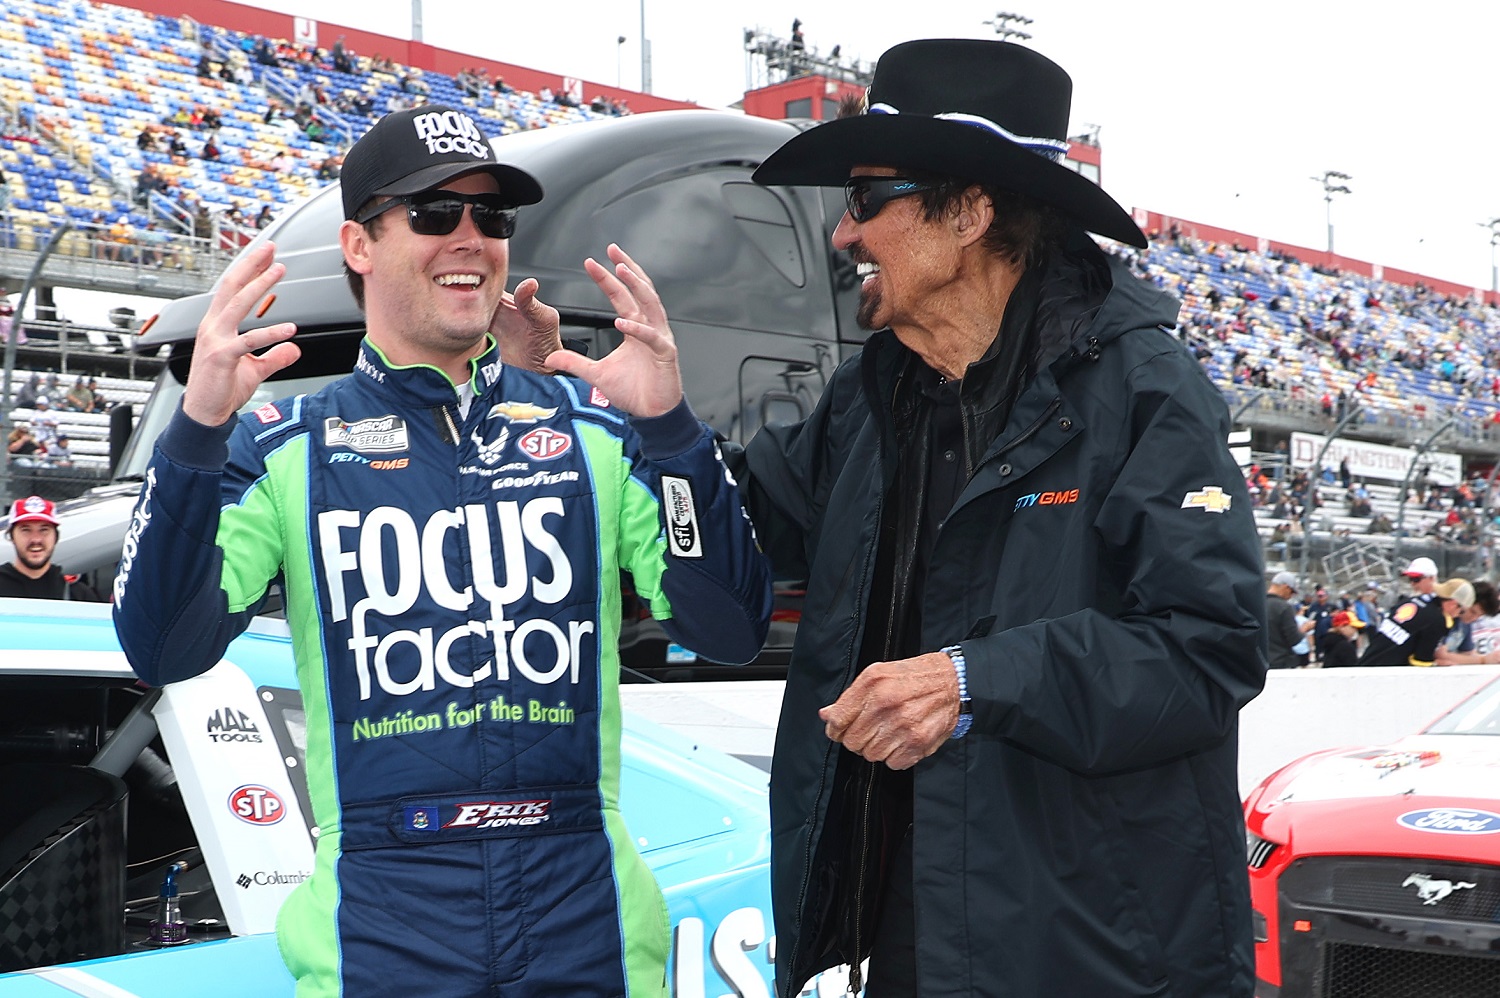 NASCAR Hall of Famer and Petty GMS Motorsports team co-owner Richard Petty and Erik Jones, driver of the No. 43 Chevy talk on the grid prior to the NASCAR Cup Series Goodyear 400 at Darlington Raceway on May 8, 2022.